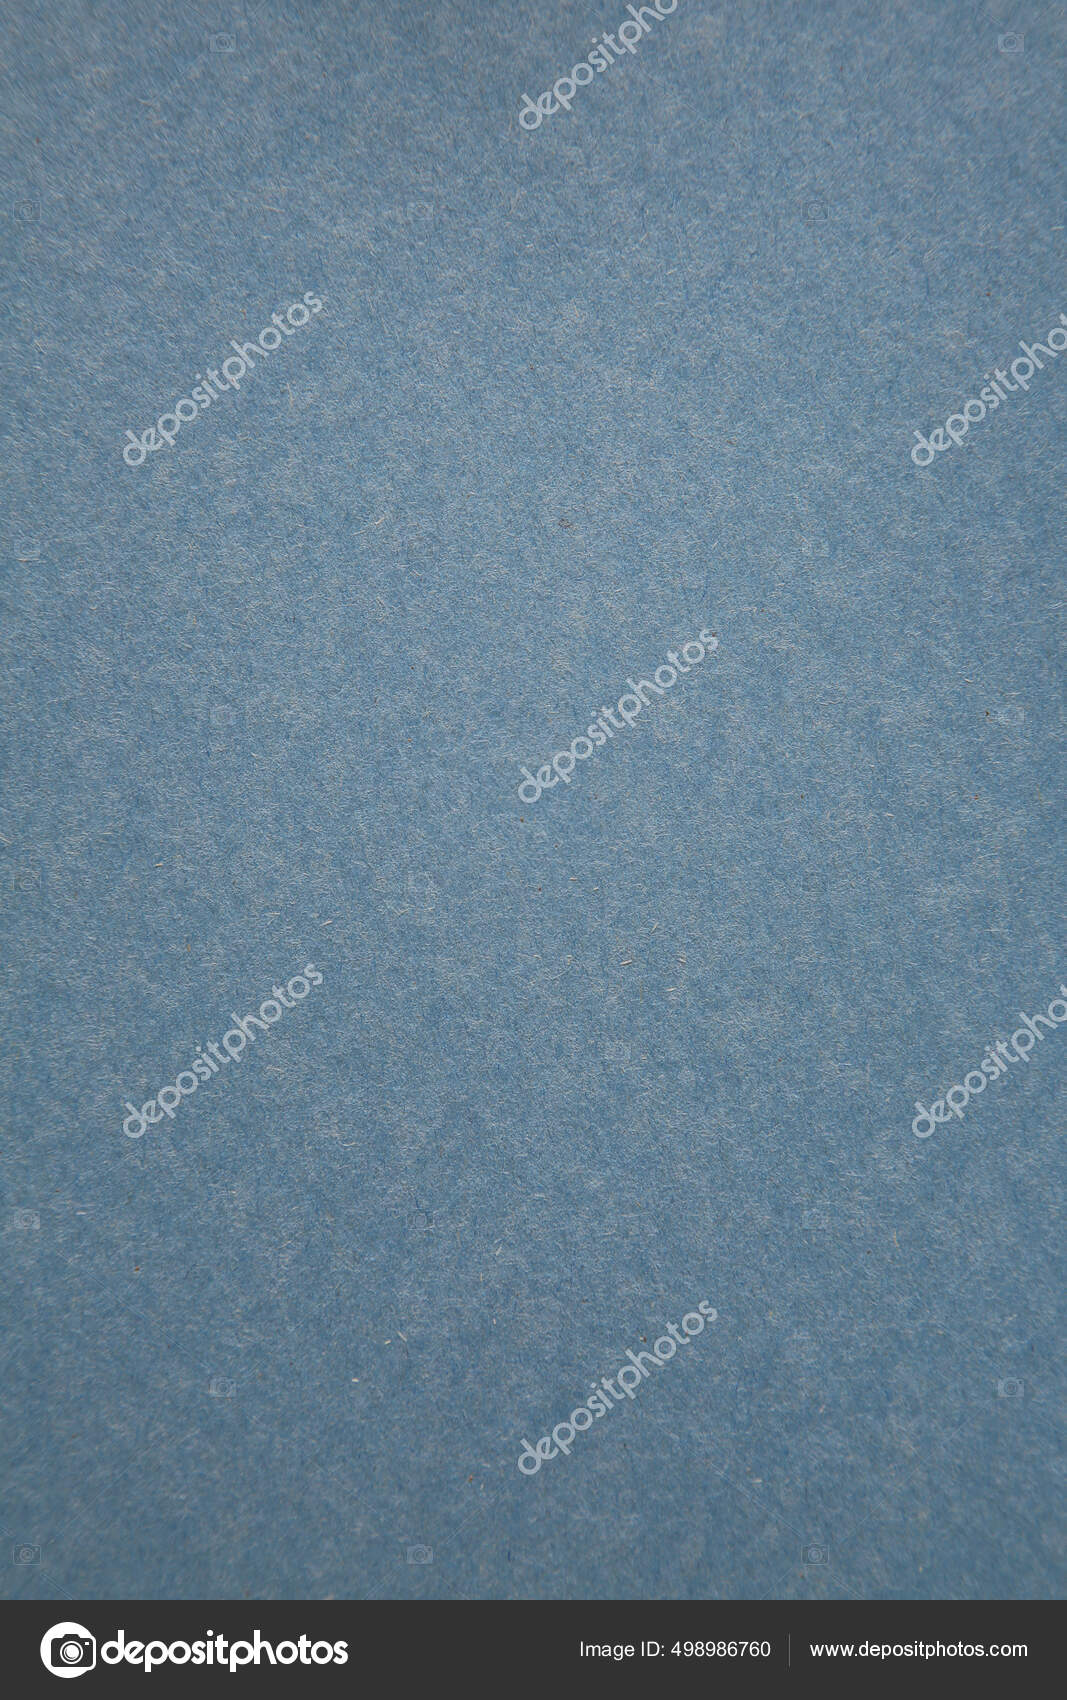 Construction Paper Macro Shot Extreme Close Colored Construction Paper  Craft Stock Photo by ©mikeledray 498987022